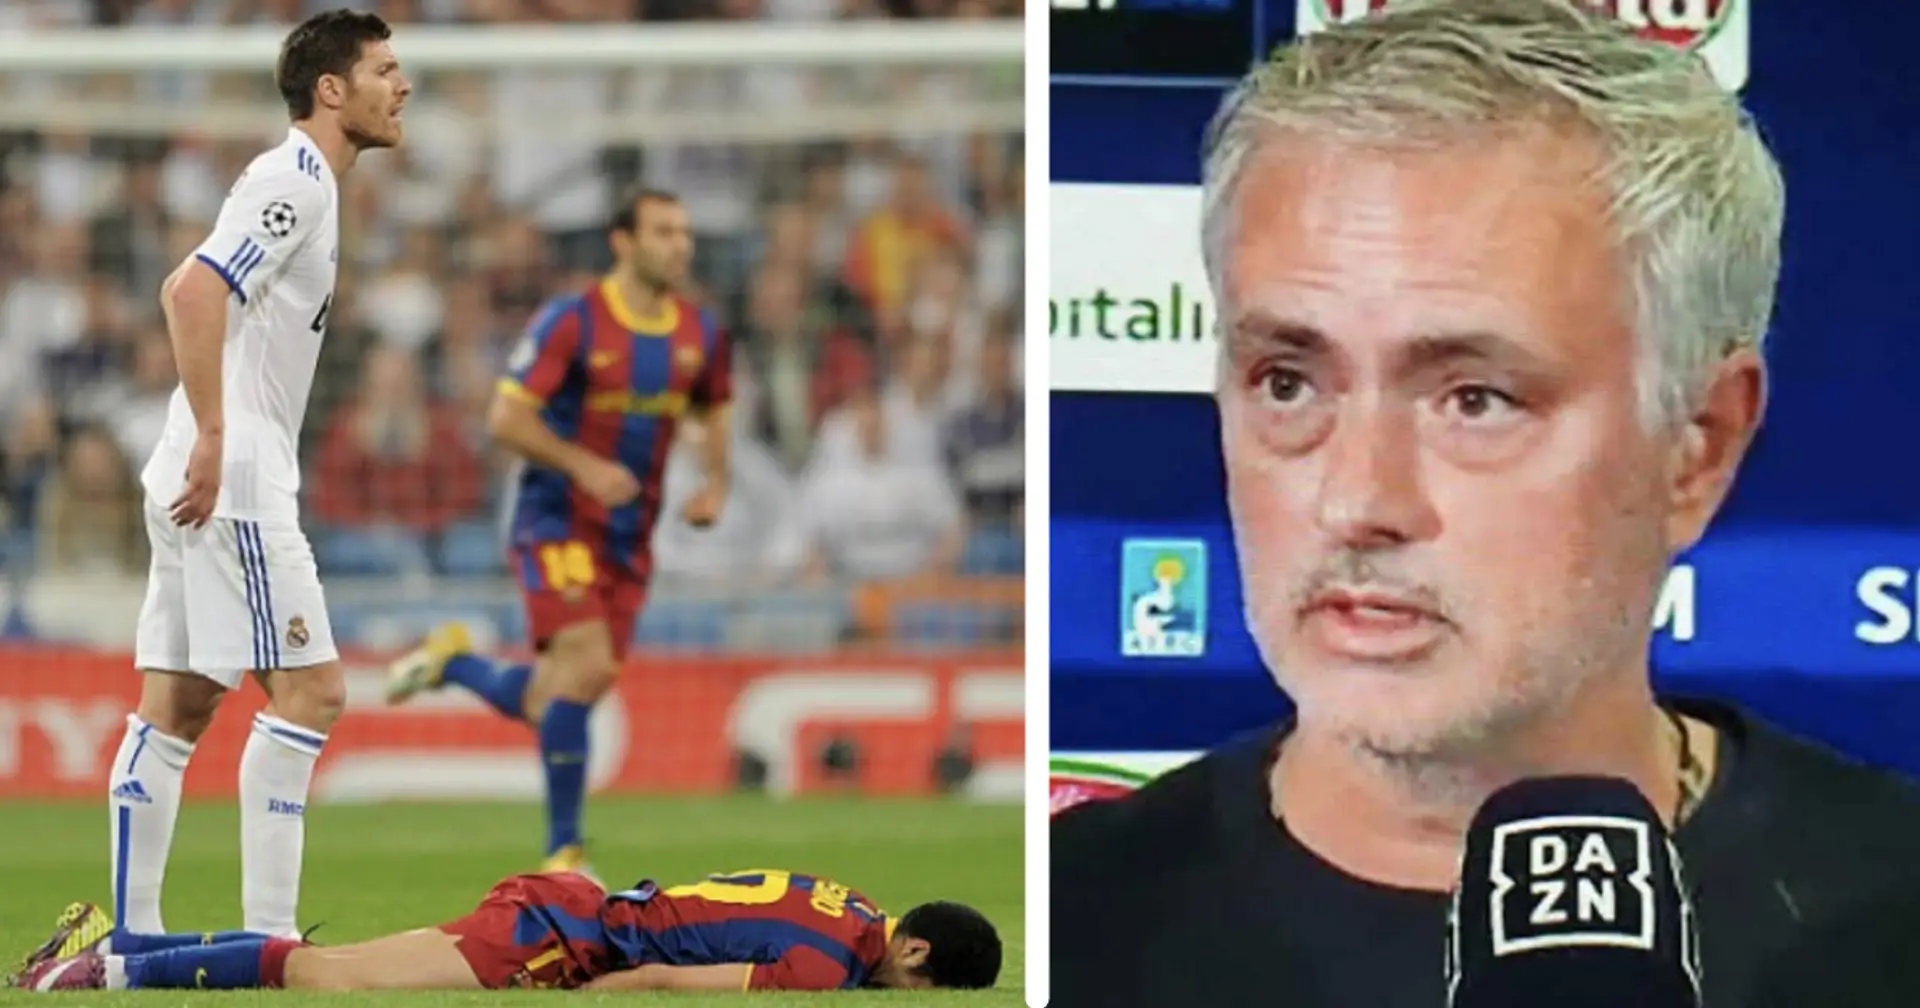 'He could also be a swimmer': Mourinho mocks former Barca star